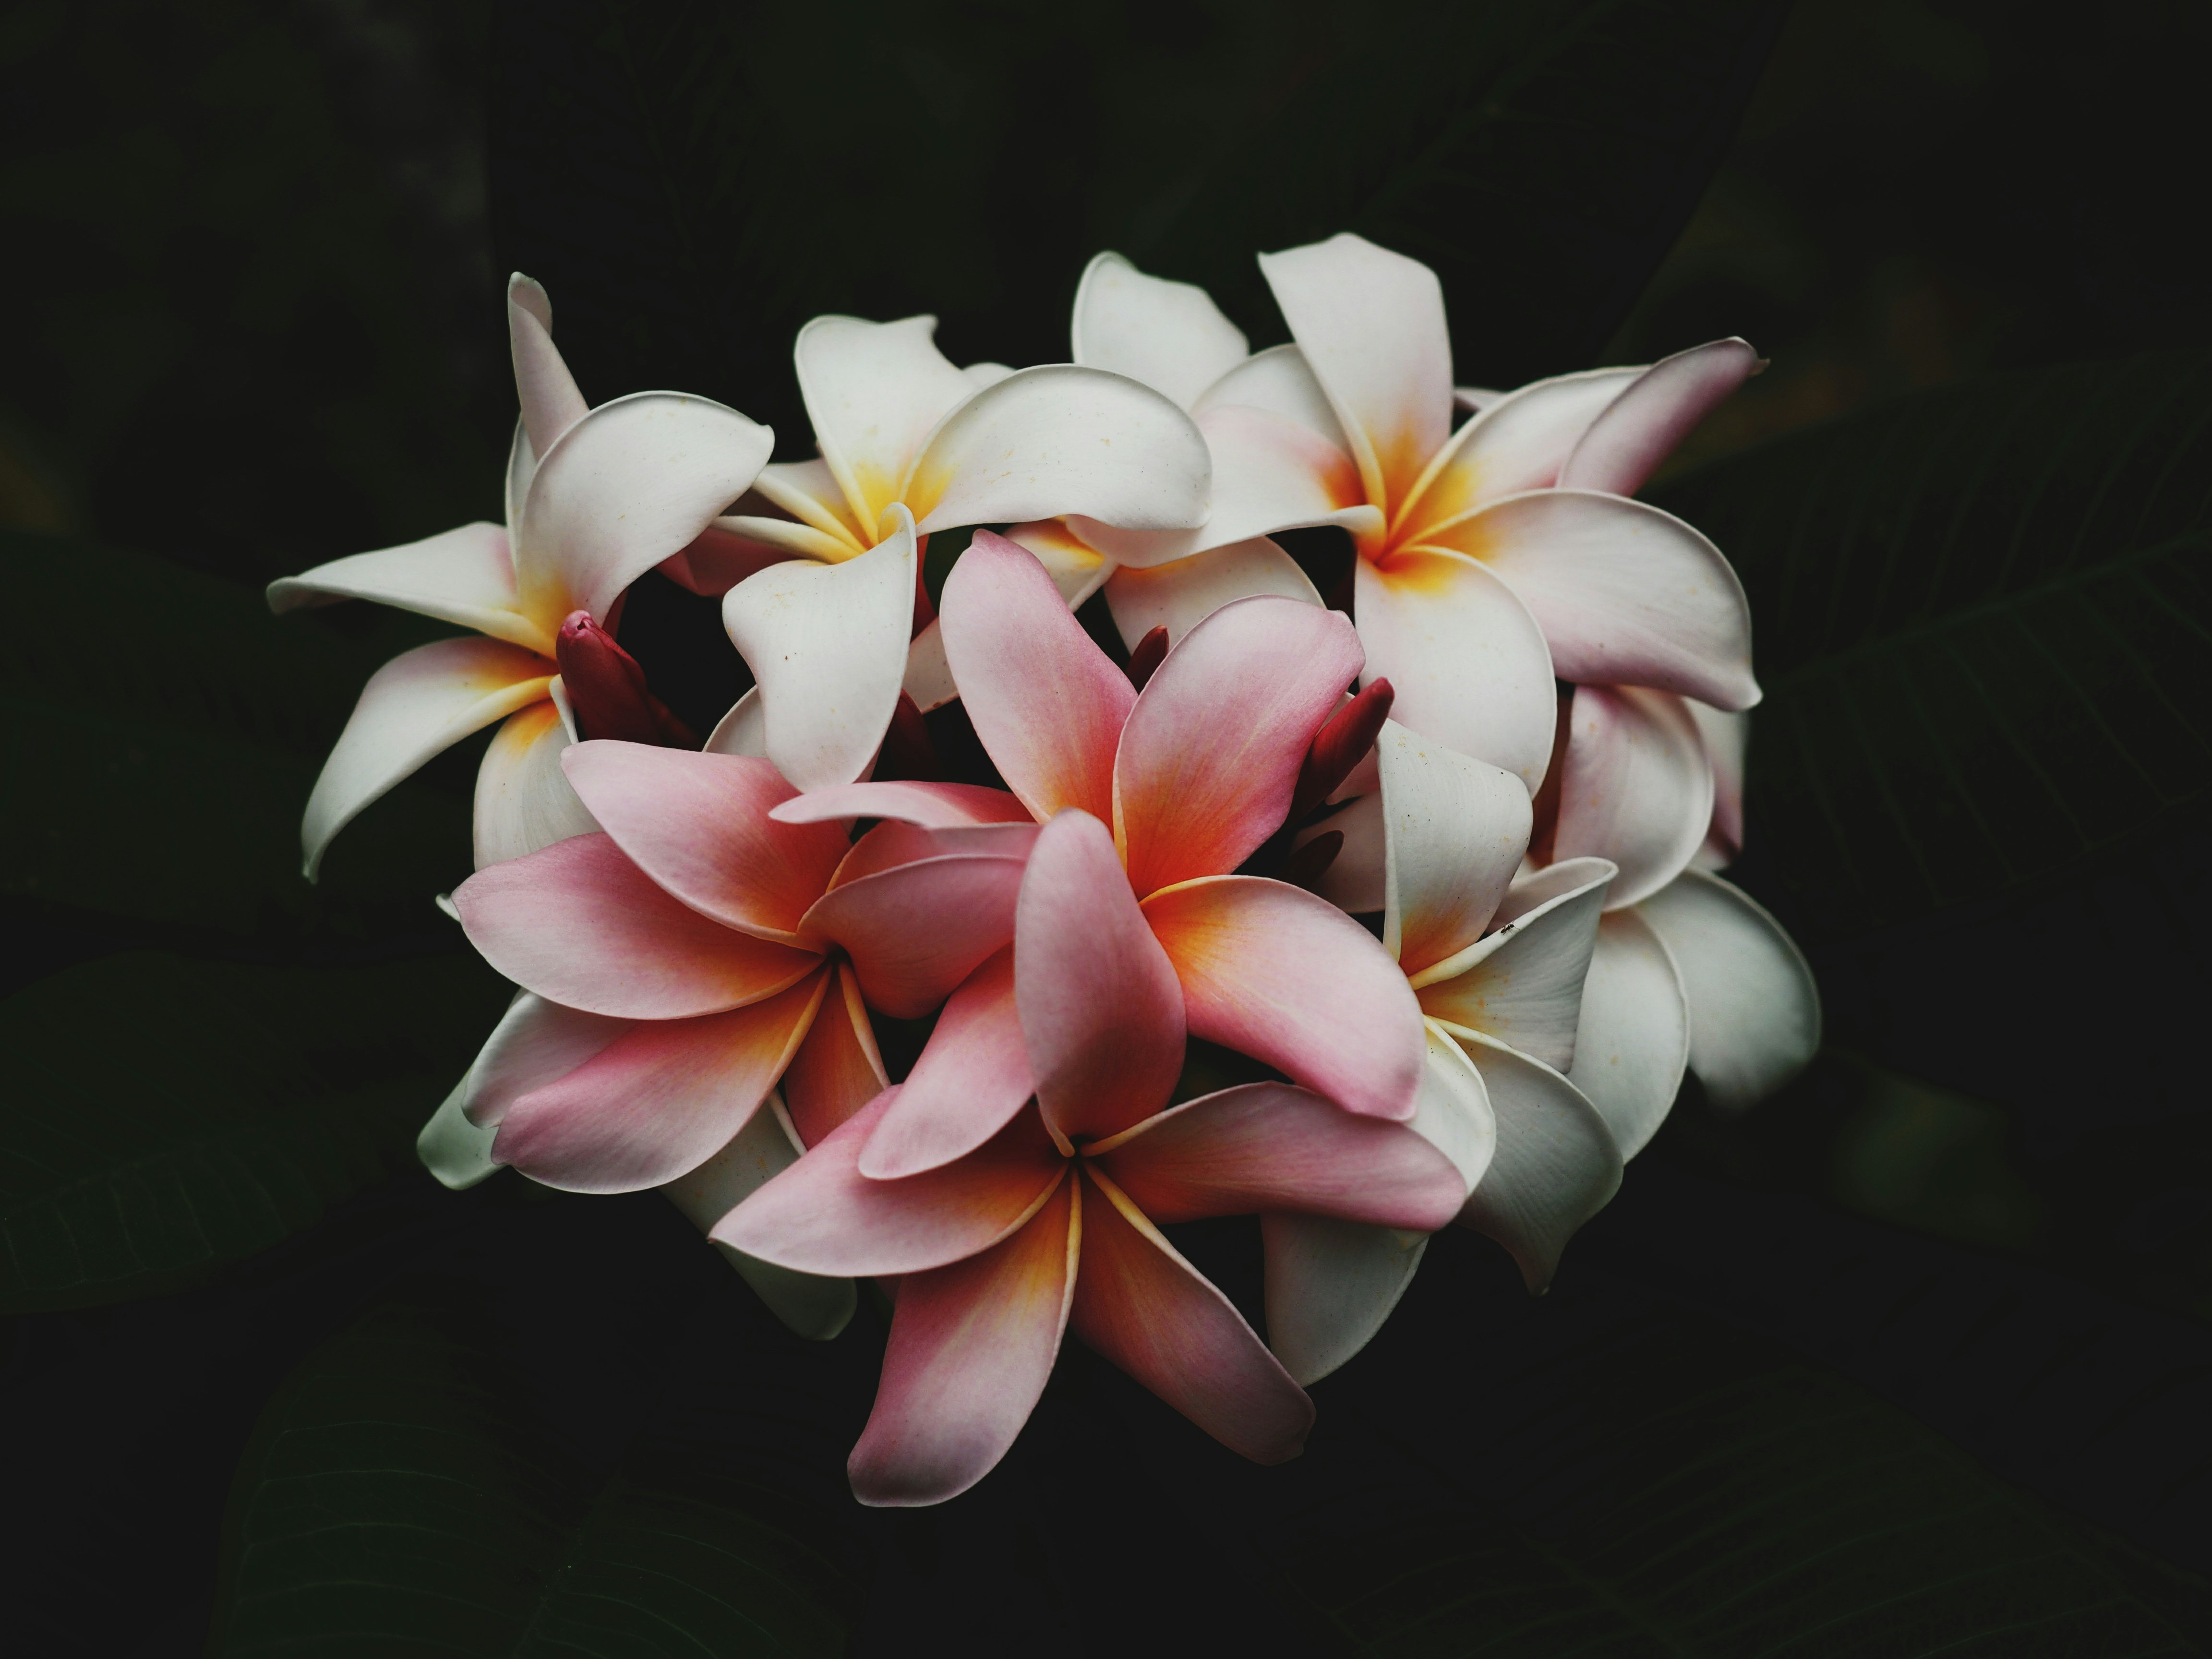 white and pink petaled flowers in the dark